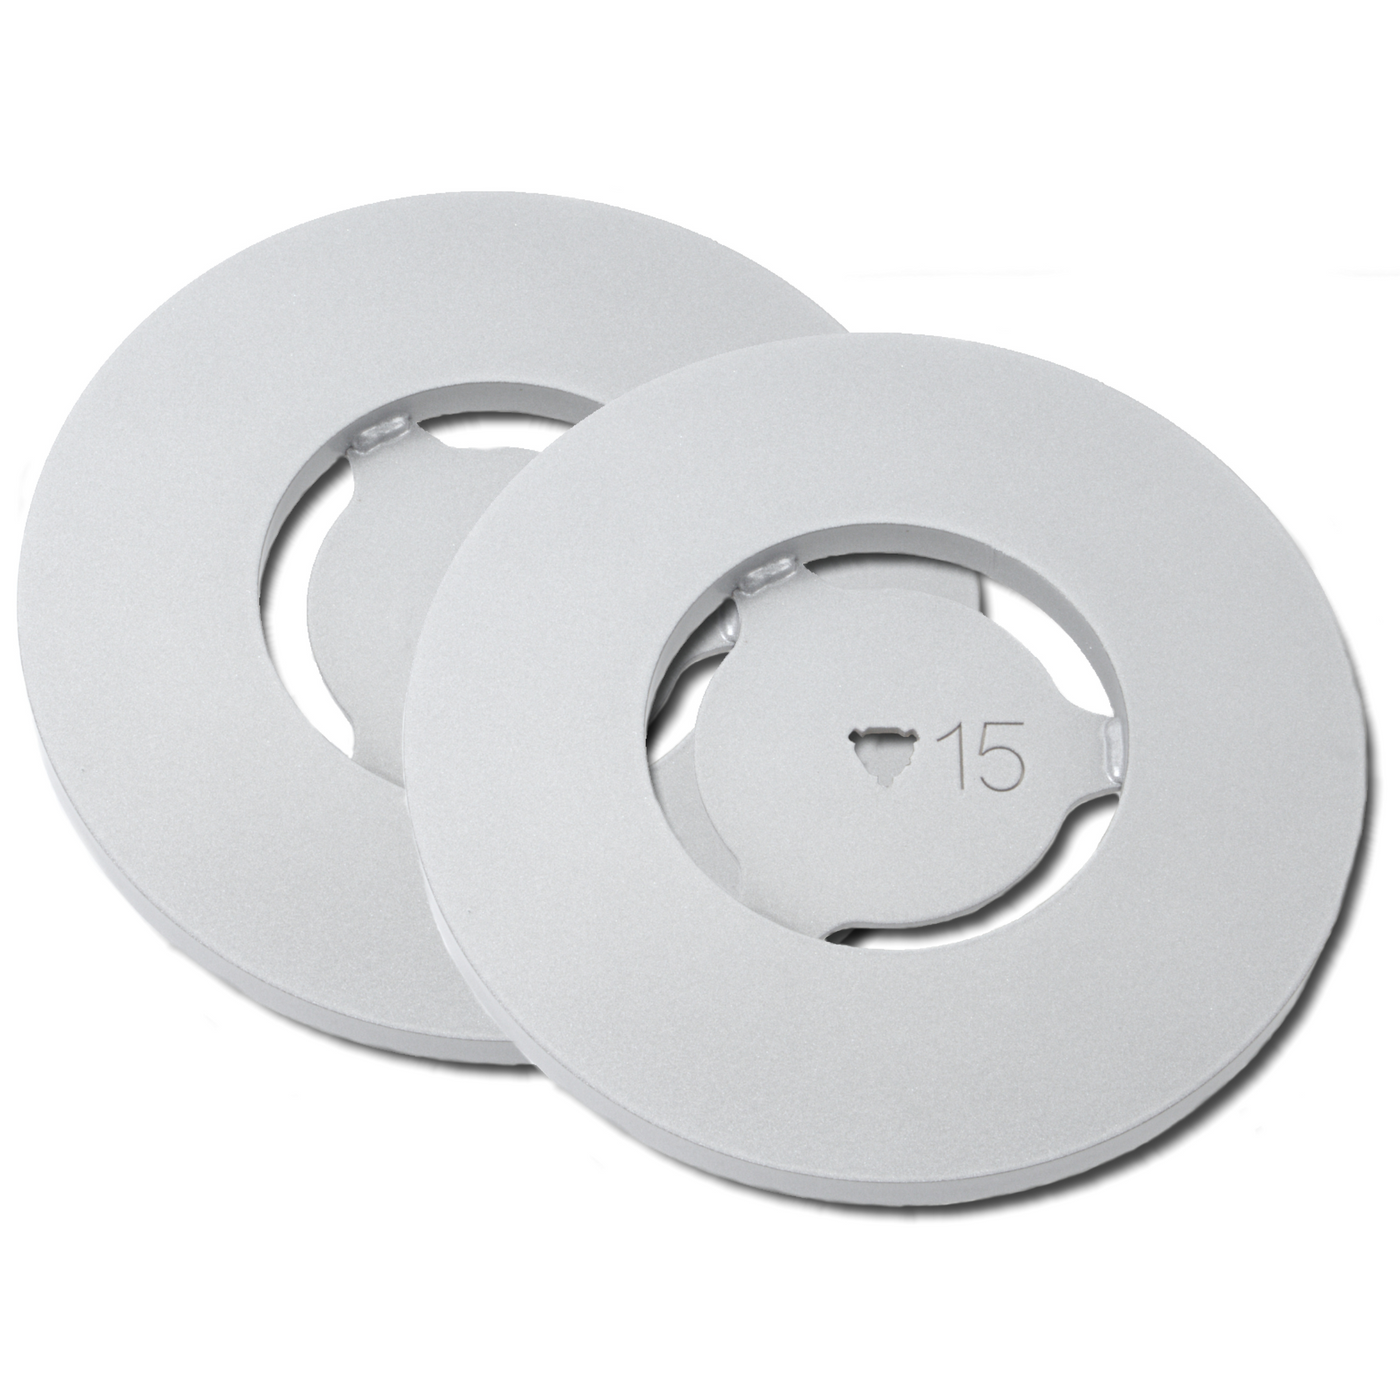 Disc set 15 mm (Not compatible in Kynett HOME & ONE!)